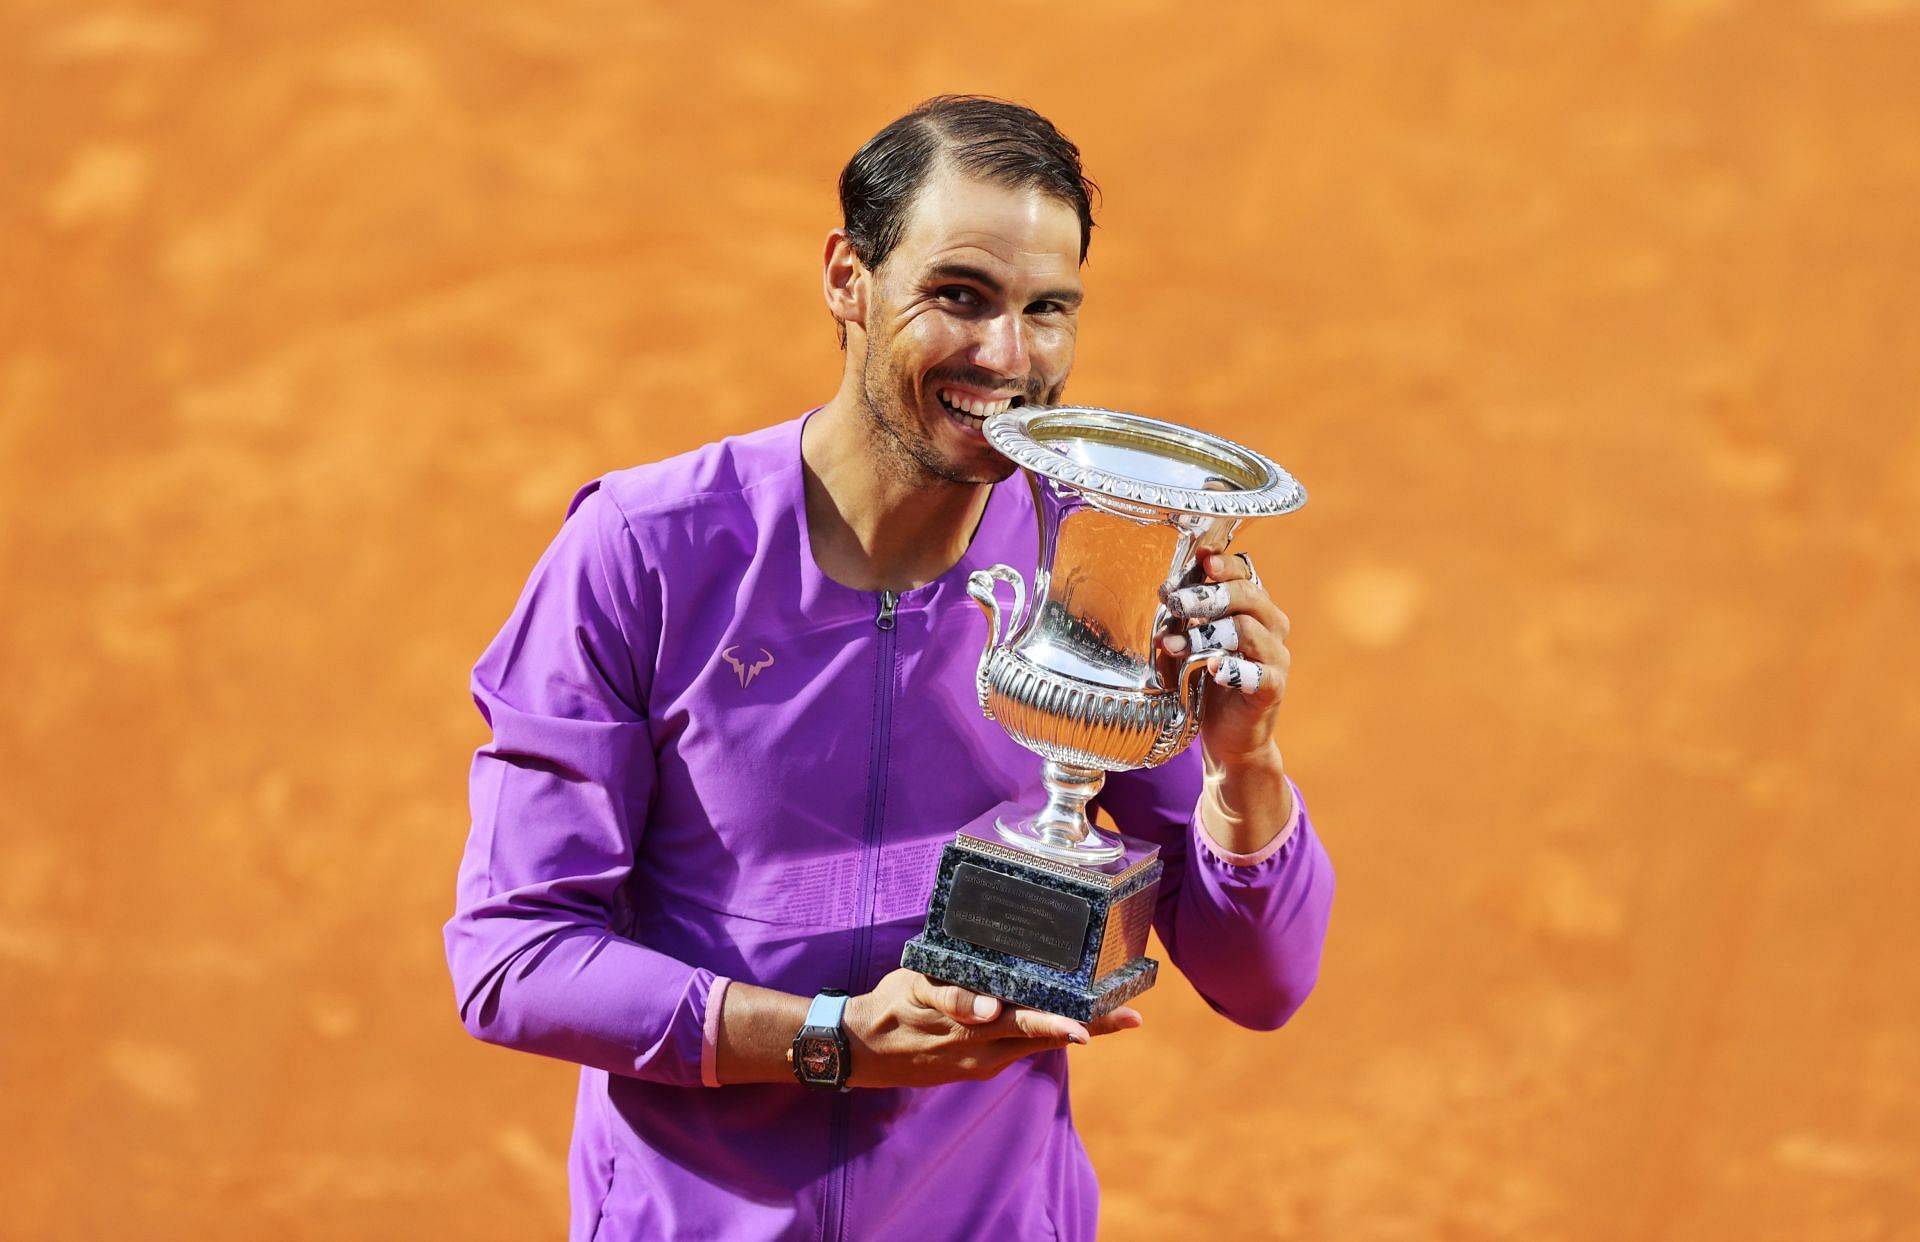 Rafael Nadal is the defending champion in Rome